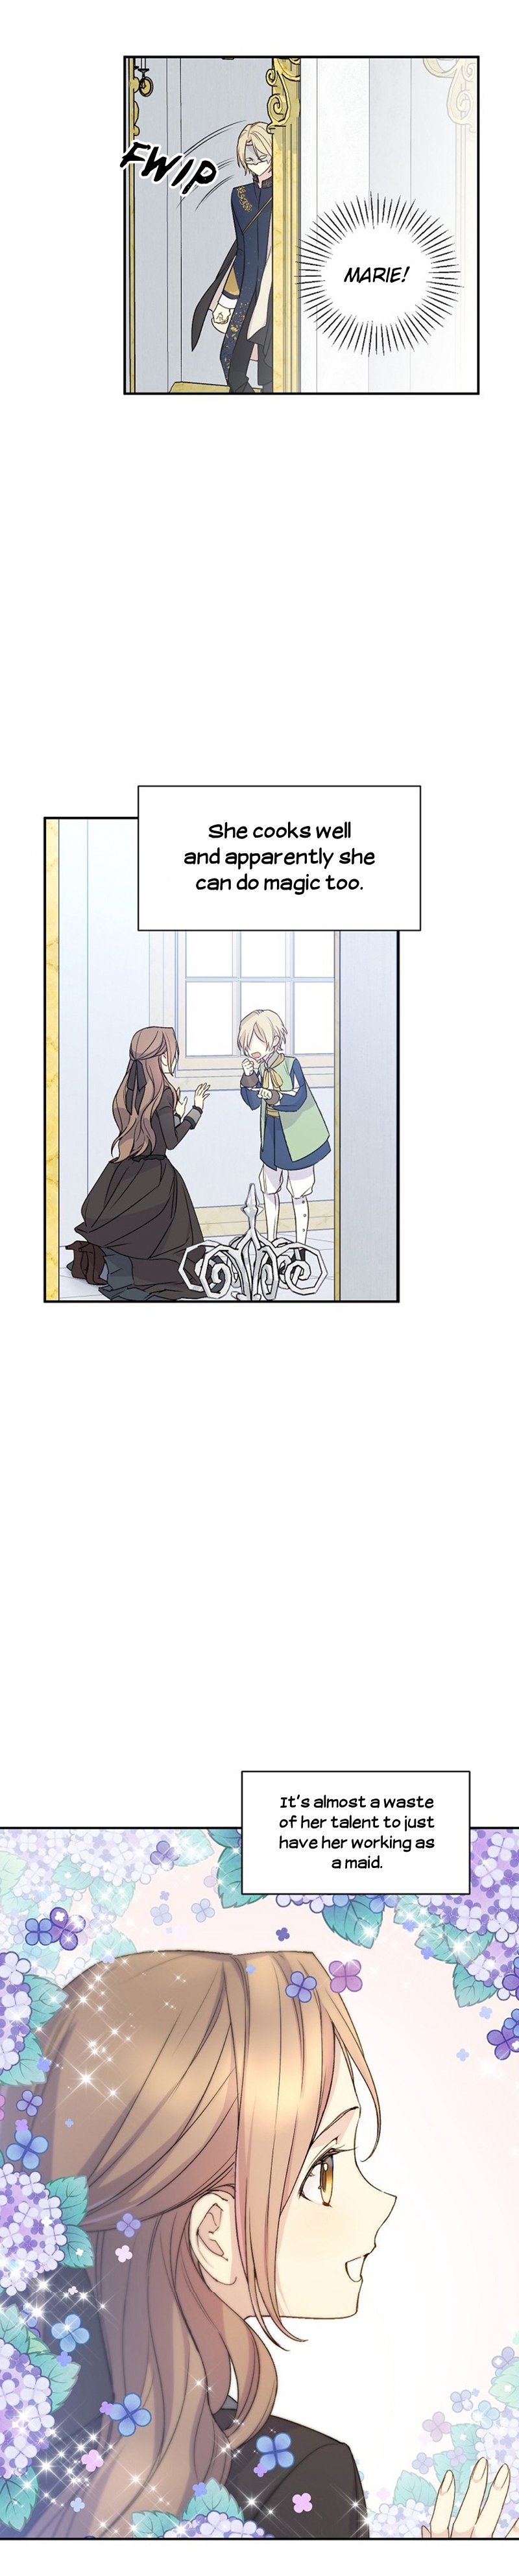 A Capable Maid chapter 21